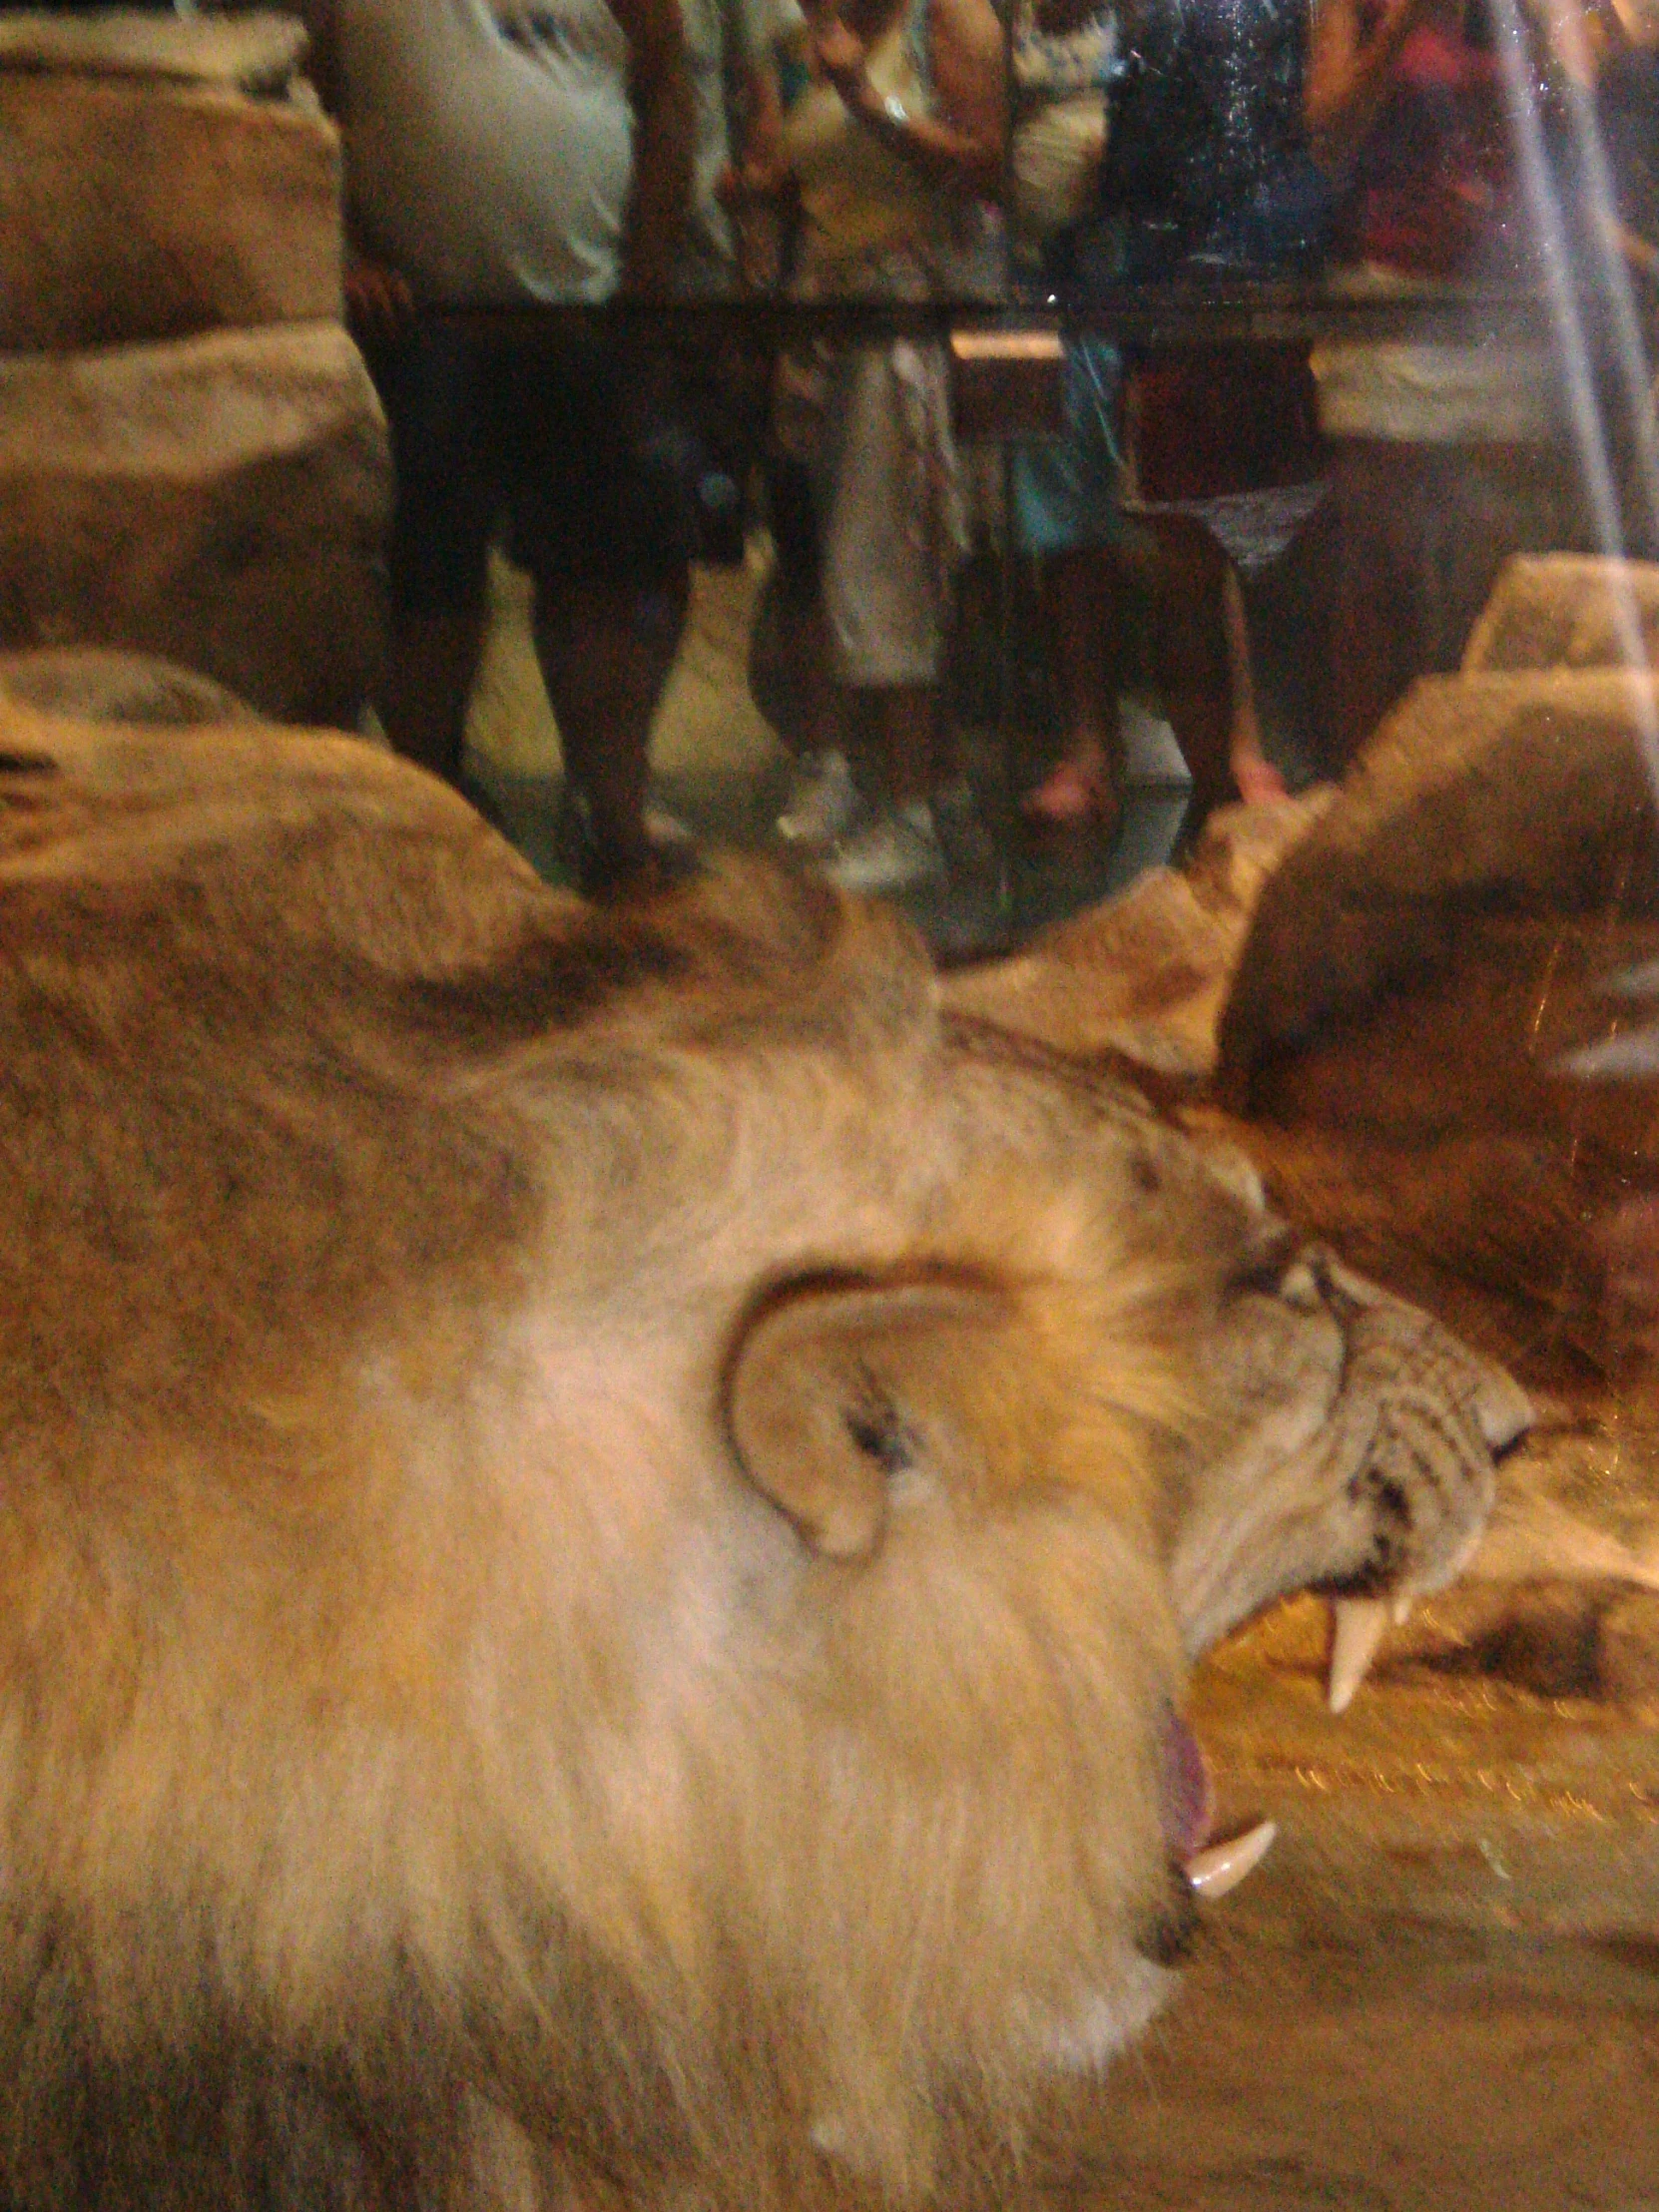 people are viewing a display with a lion roaring it's mouth